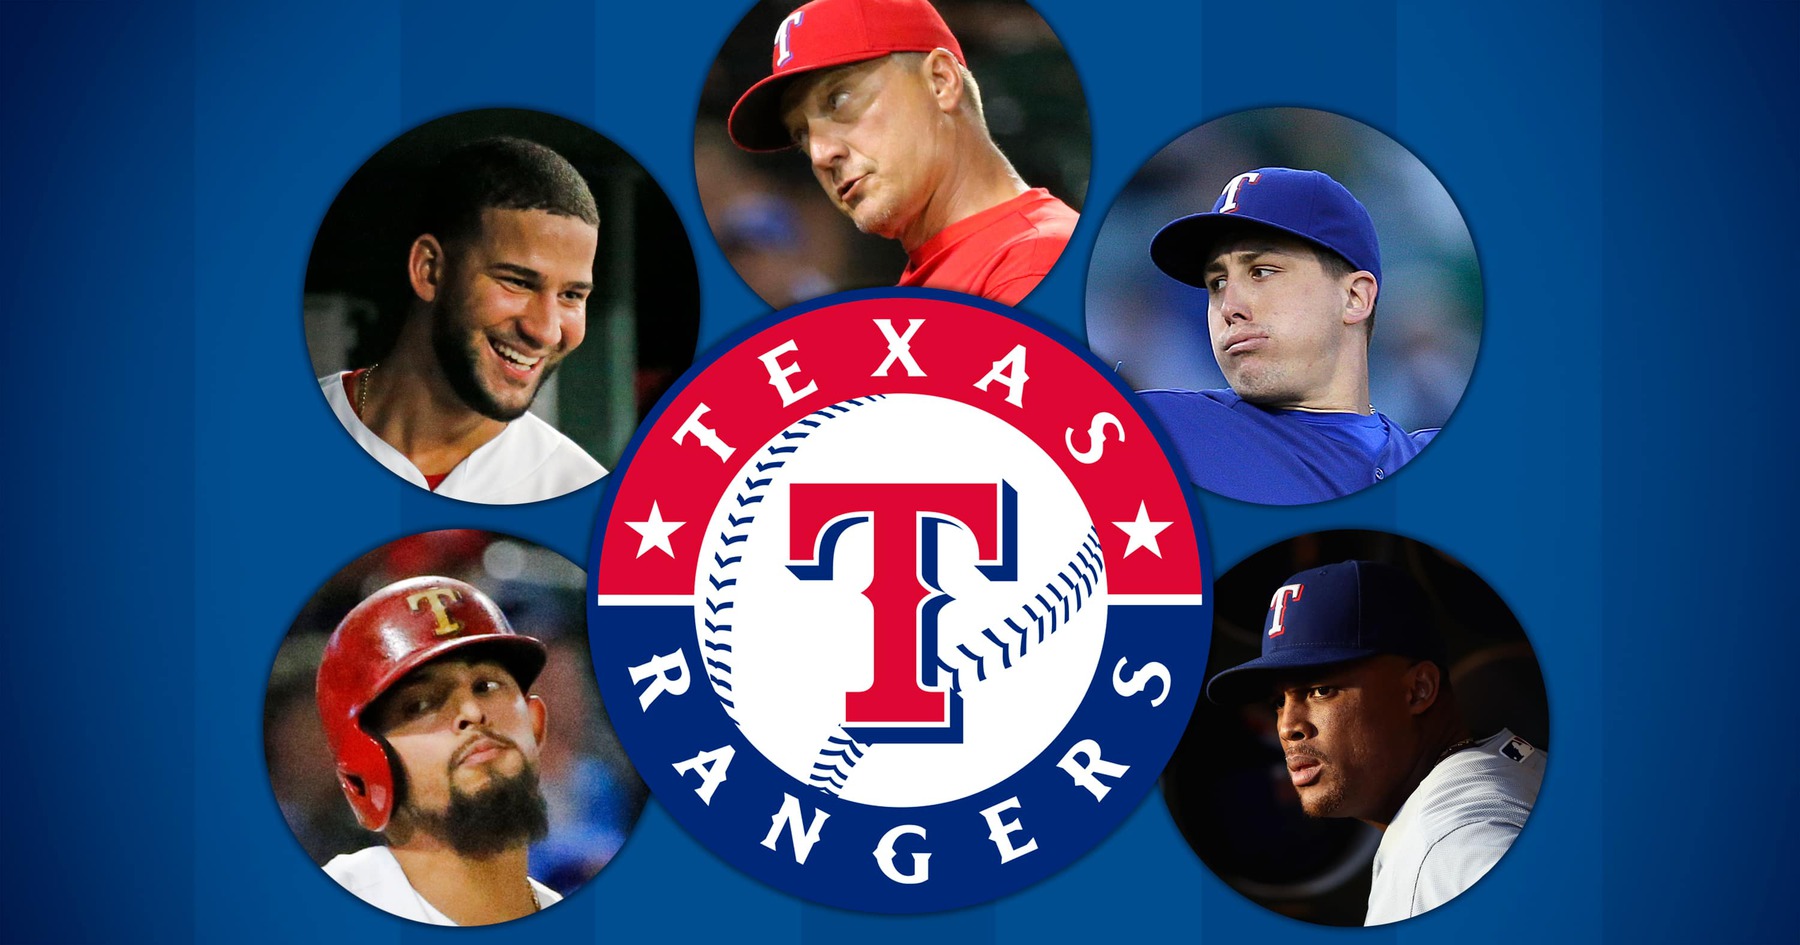 Texas Rangers vs. Seattle Mariners Tickets, New York, United States